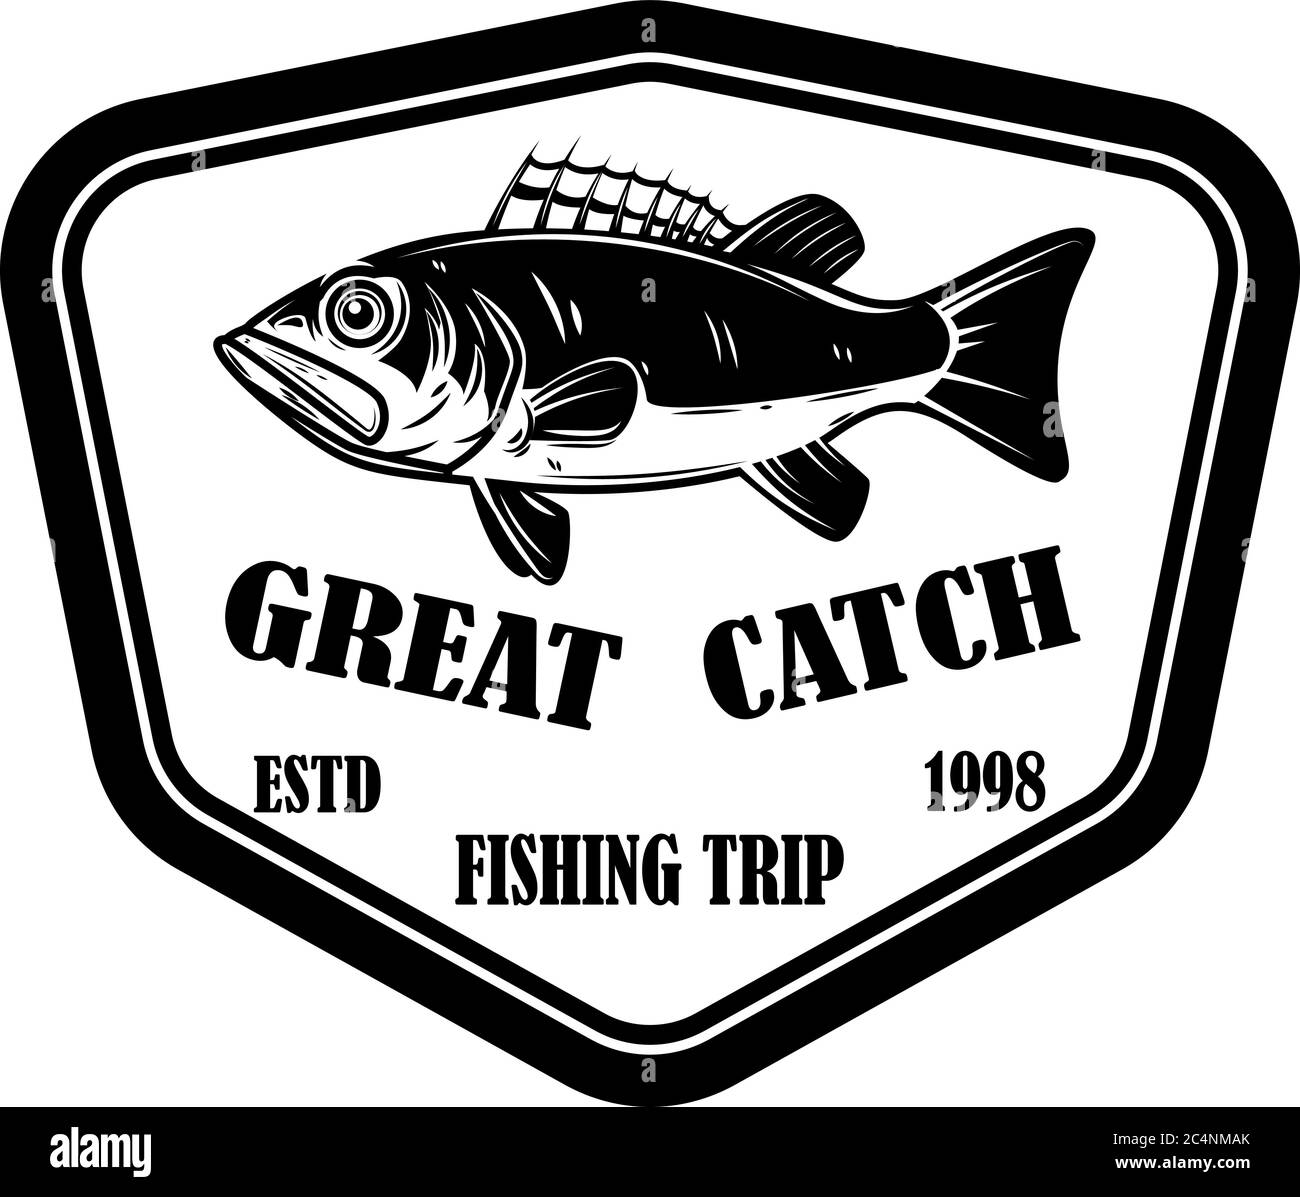 Great catch. Emblem template with perch. Design element for logo, label, sign, poster. Vector illustration Stock Vector